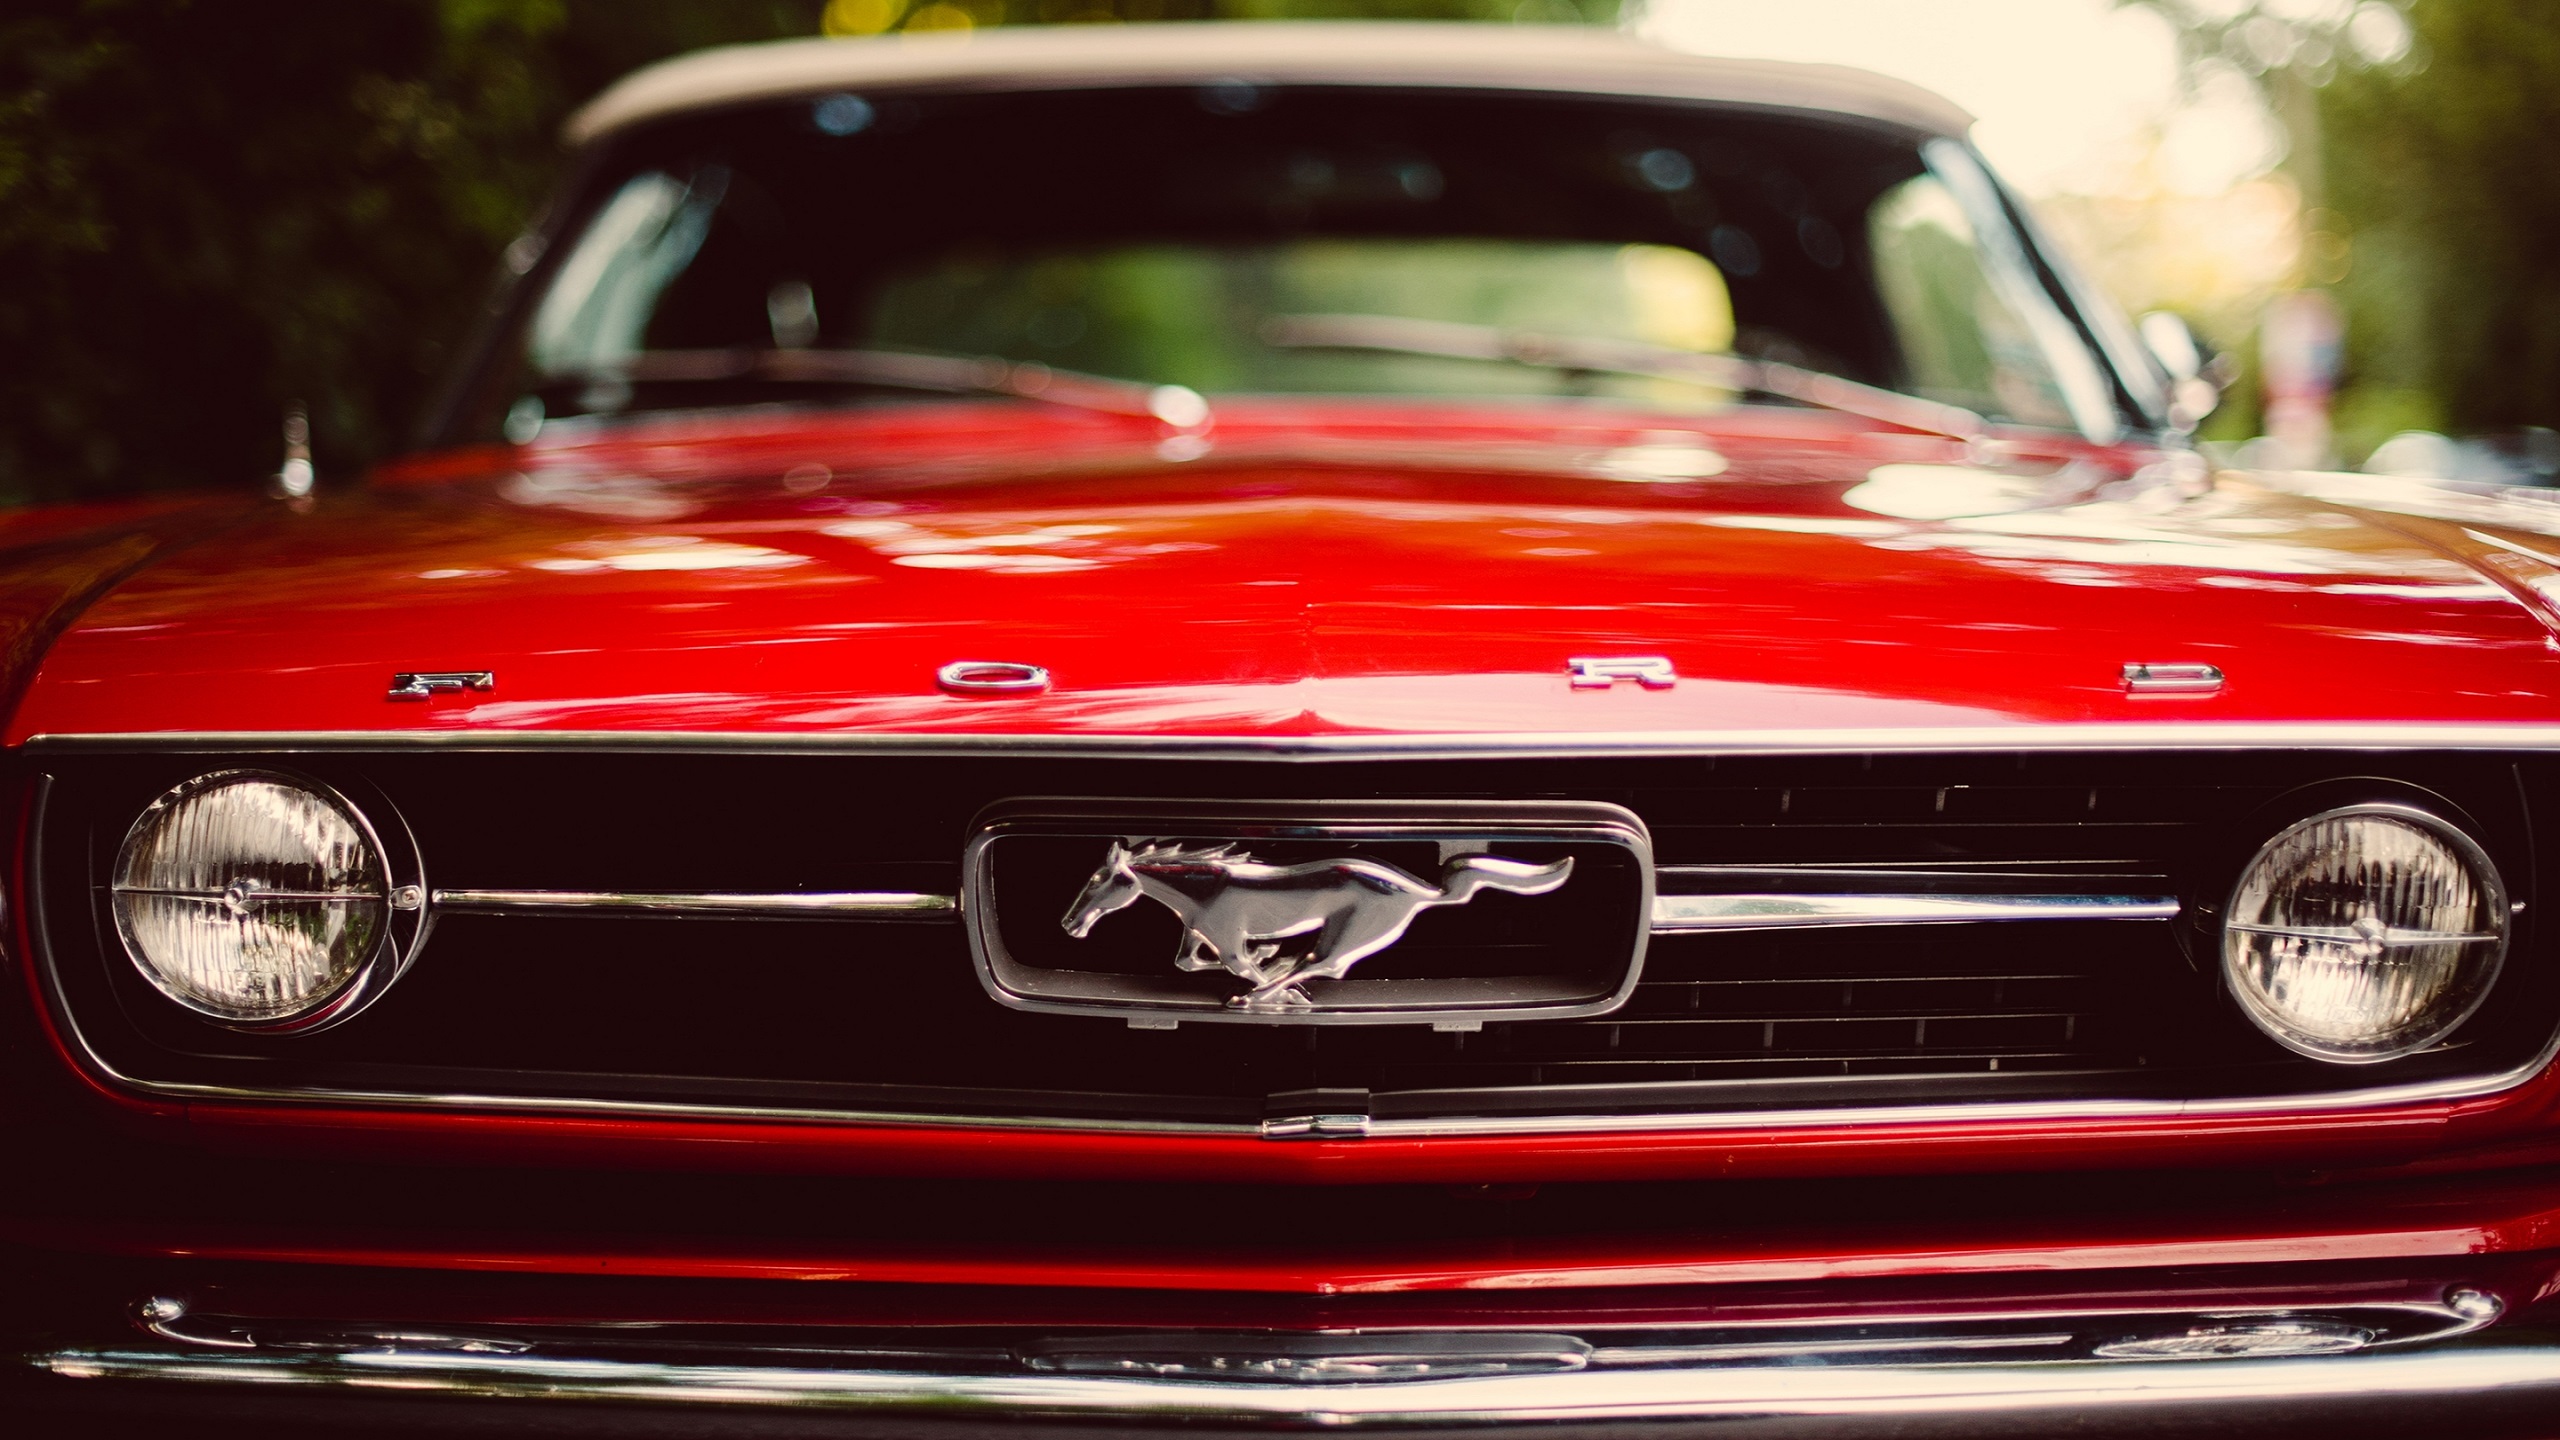 Red Ford Mustang Wallpaper Borrow